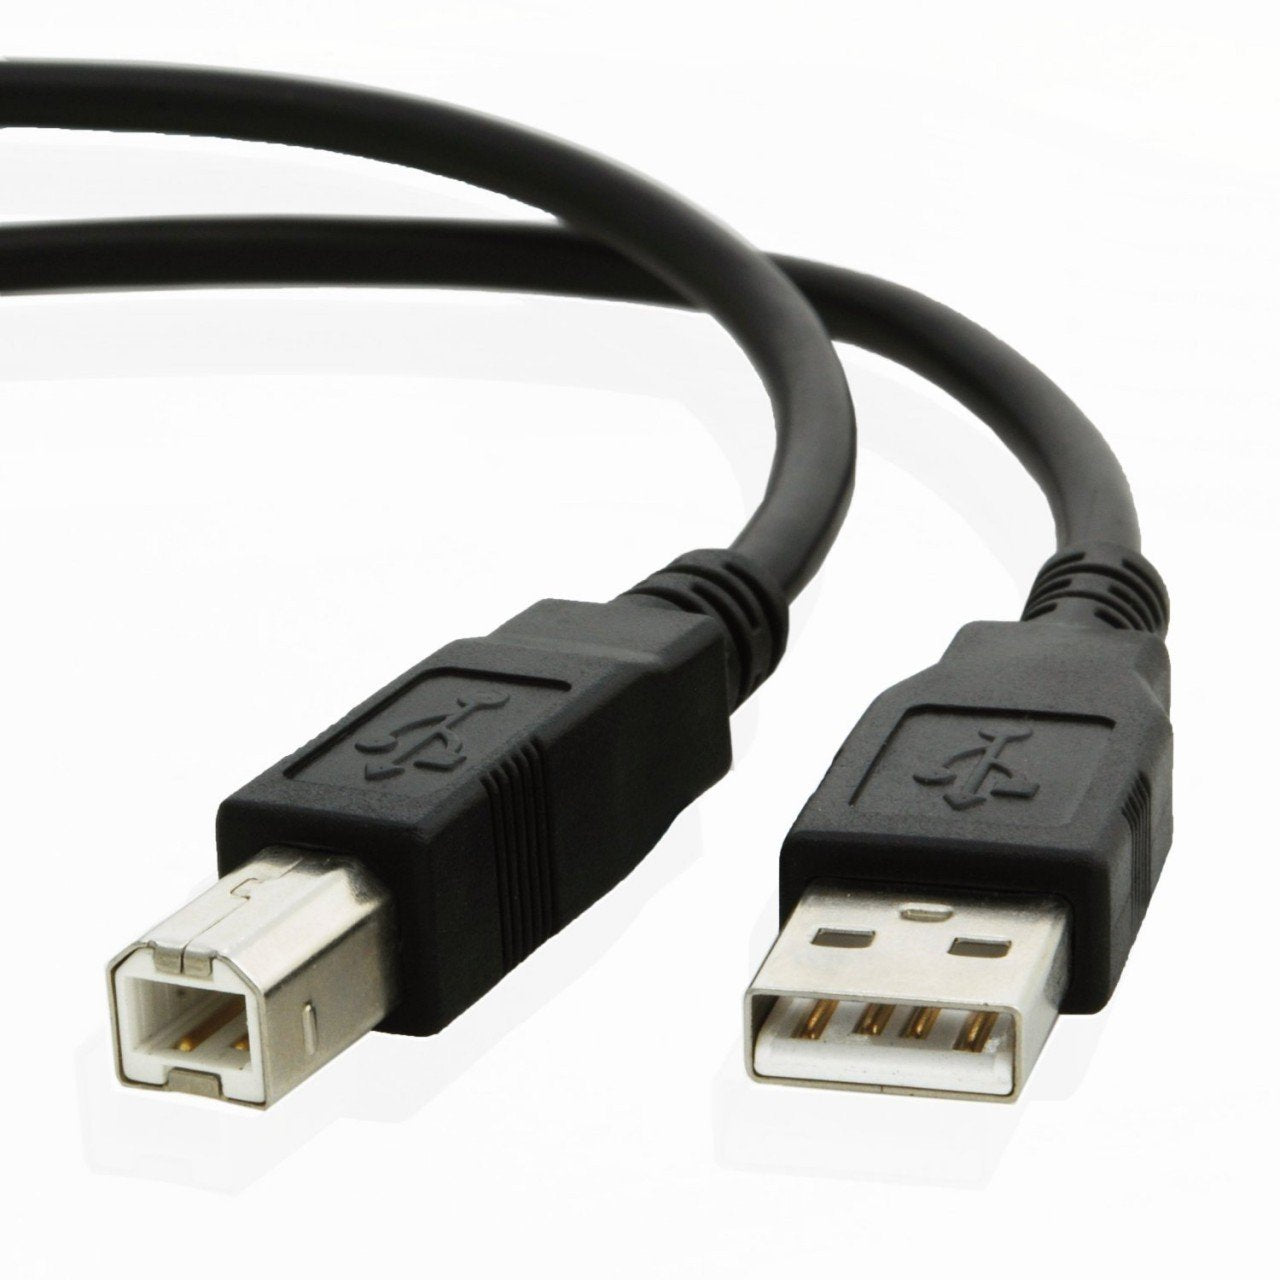 USB cable for Canon ISENSYS MF411dw